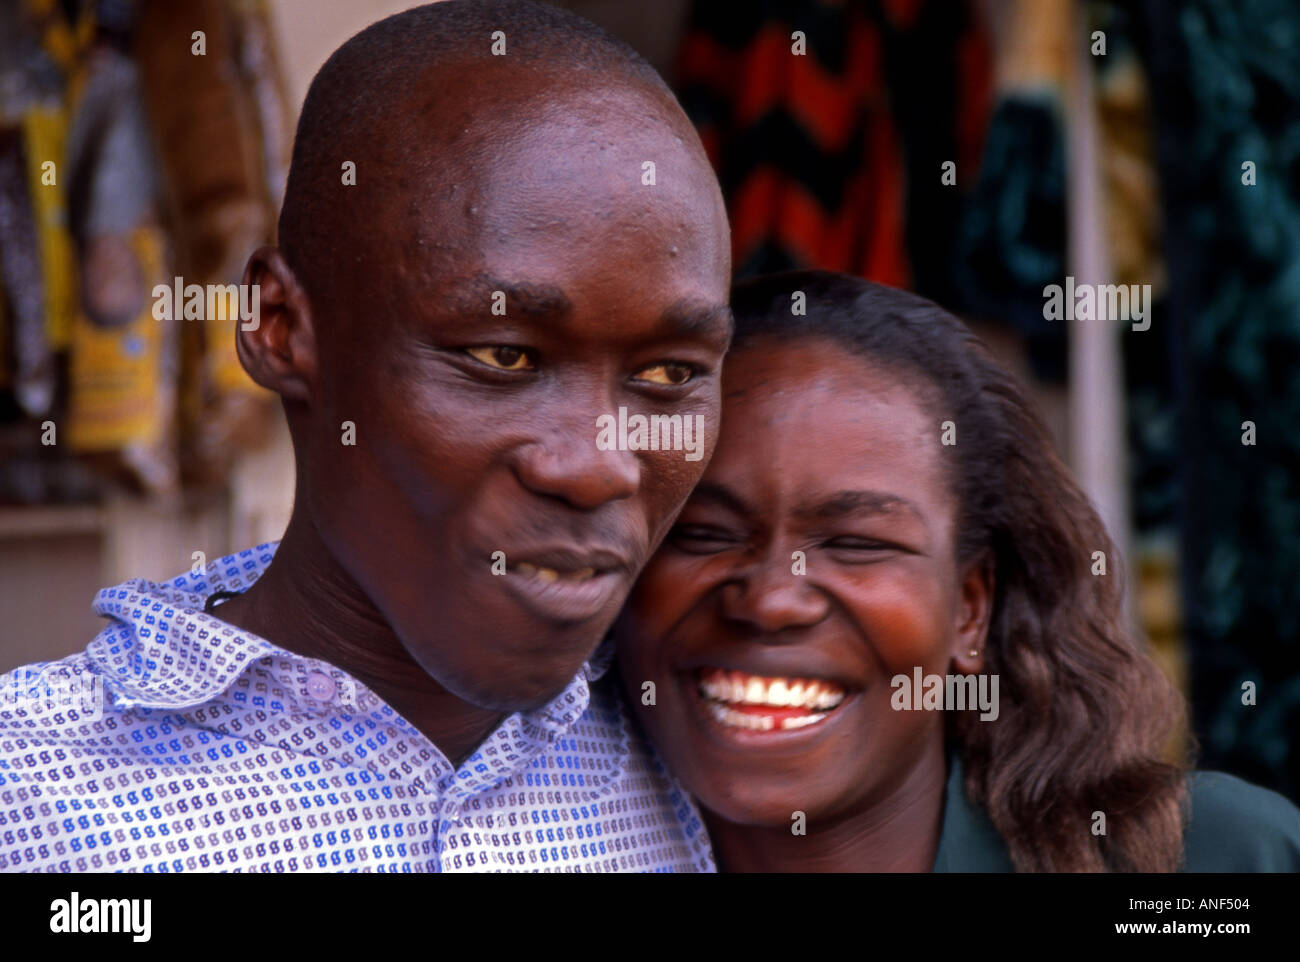 Portrait of smiling young black African man & woman posing together in outdoor location Jinja City Uganda East Africa Stock Photo